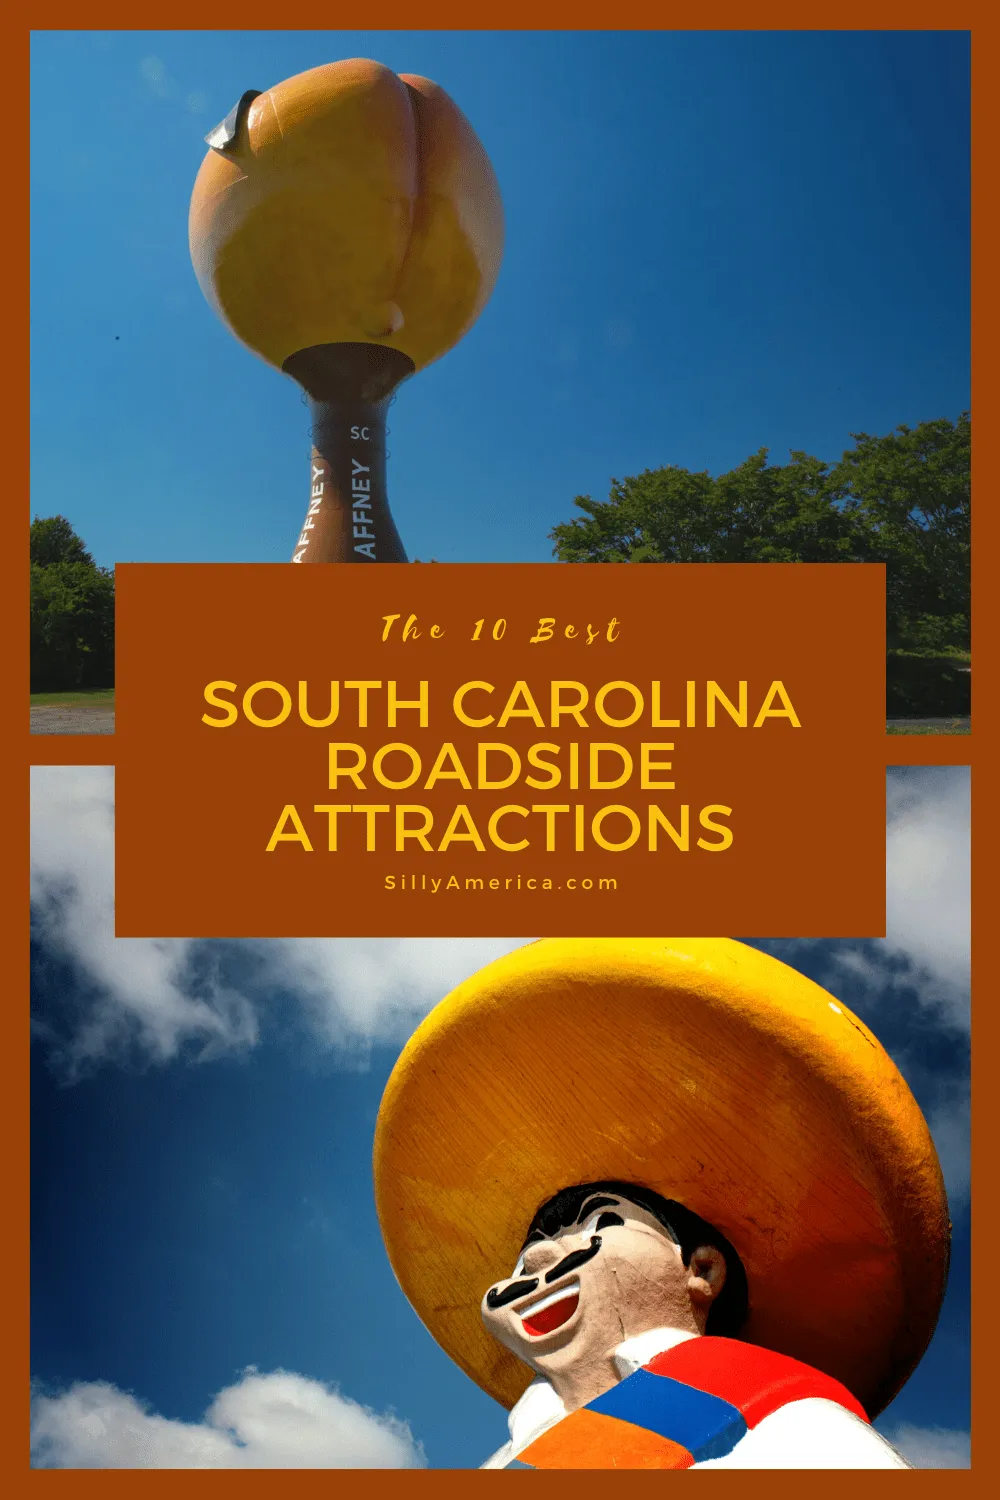 The best South Carolina roadside attractions to visit on a South Carolina road trip. Add these roadside oddities to your travel bucket list or itinerary! Visit these weird roadside attractions and fun road trip stops for kids and adults. #SouthCarolinaRoadsideAttractions #SouthCarolinaRoadsideAttraction #RoadsideAttractions #RoadsideAttraction #RoadTrip #SouthCarolinaRoadTrip #SouthCarolinaRoadTripBucketLists #SouthCarolinaBucketList #SouthCarolinaTravelRoadTrip #WeirdRoadsideAttractions